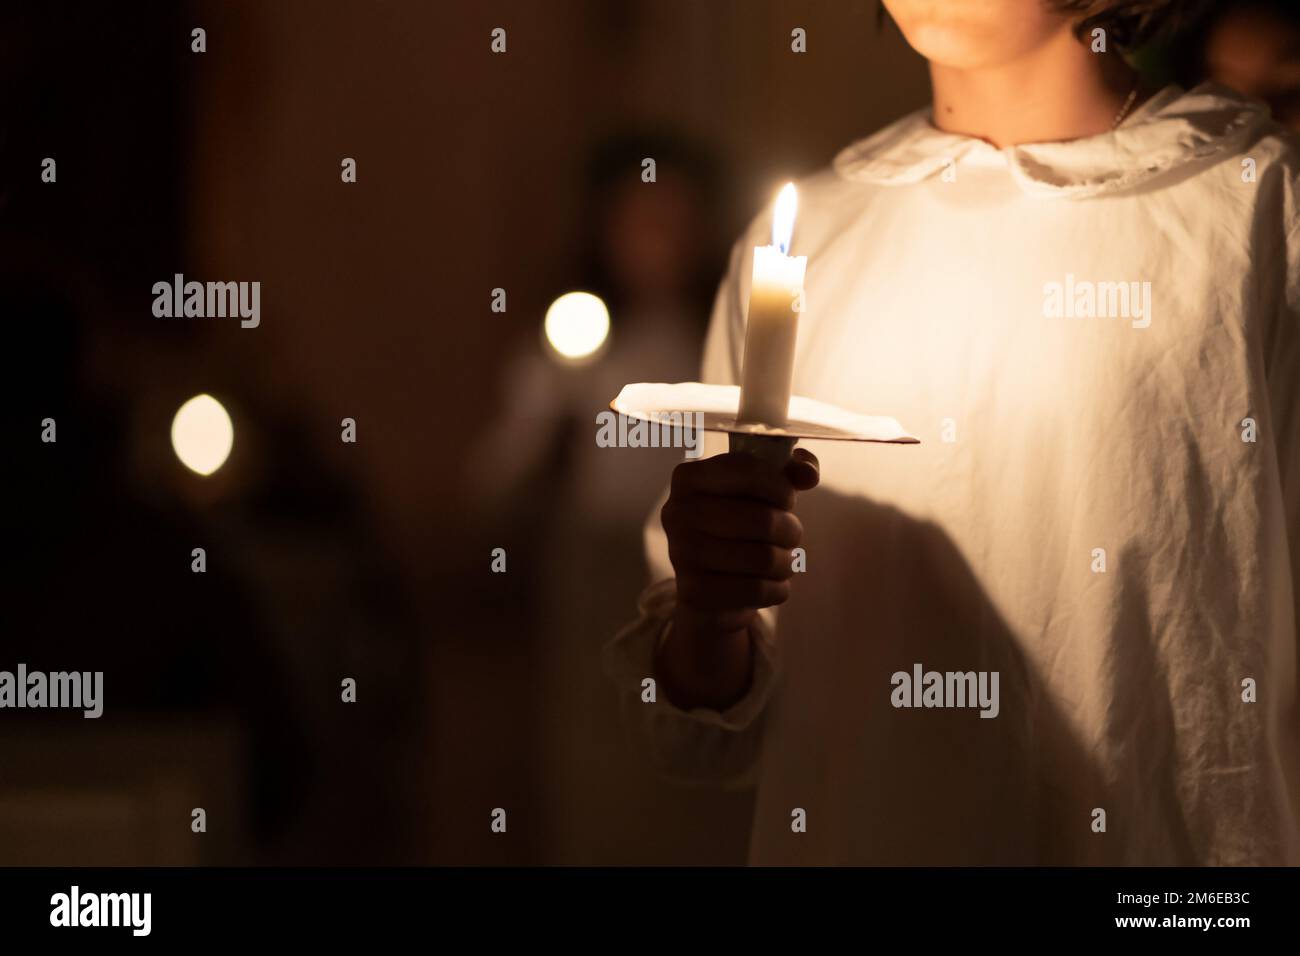 People handling candles in the hands. Christmas and lucia holidays Stock Photo